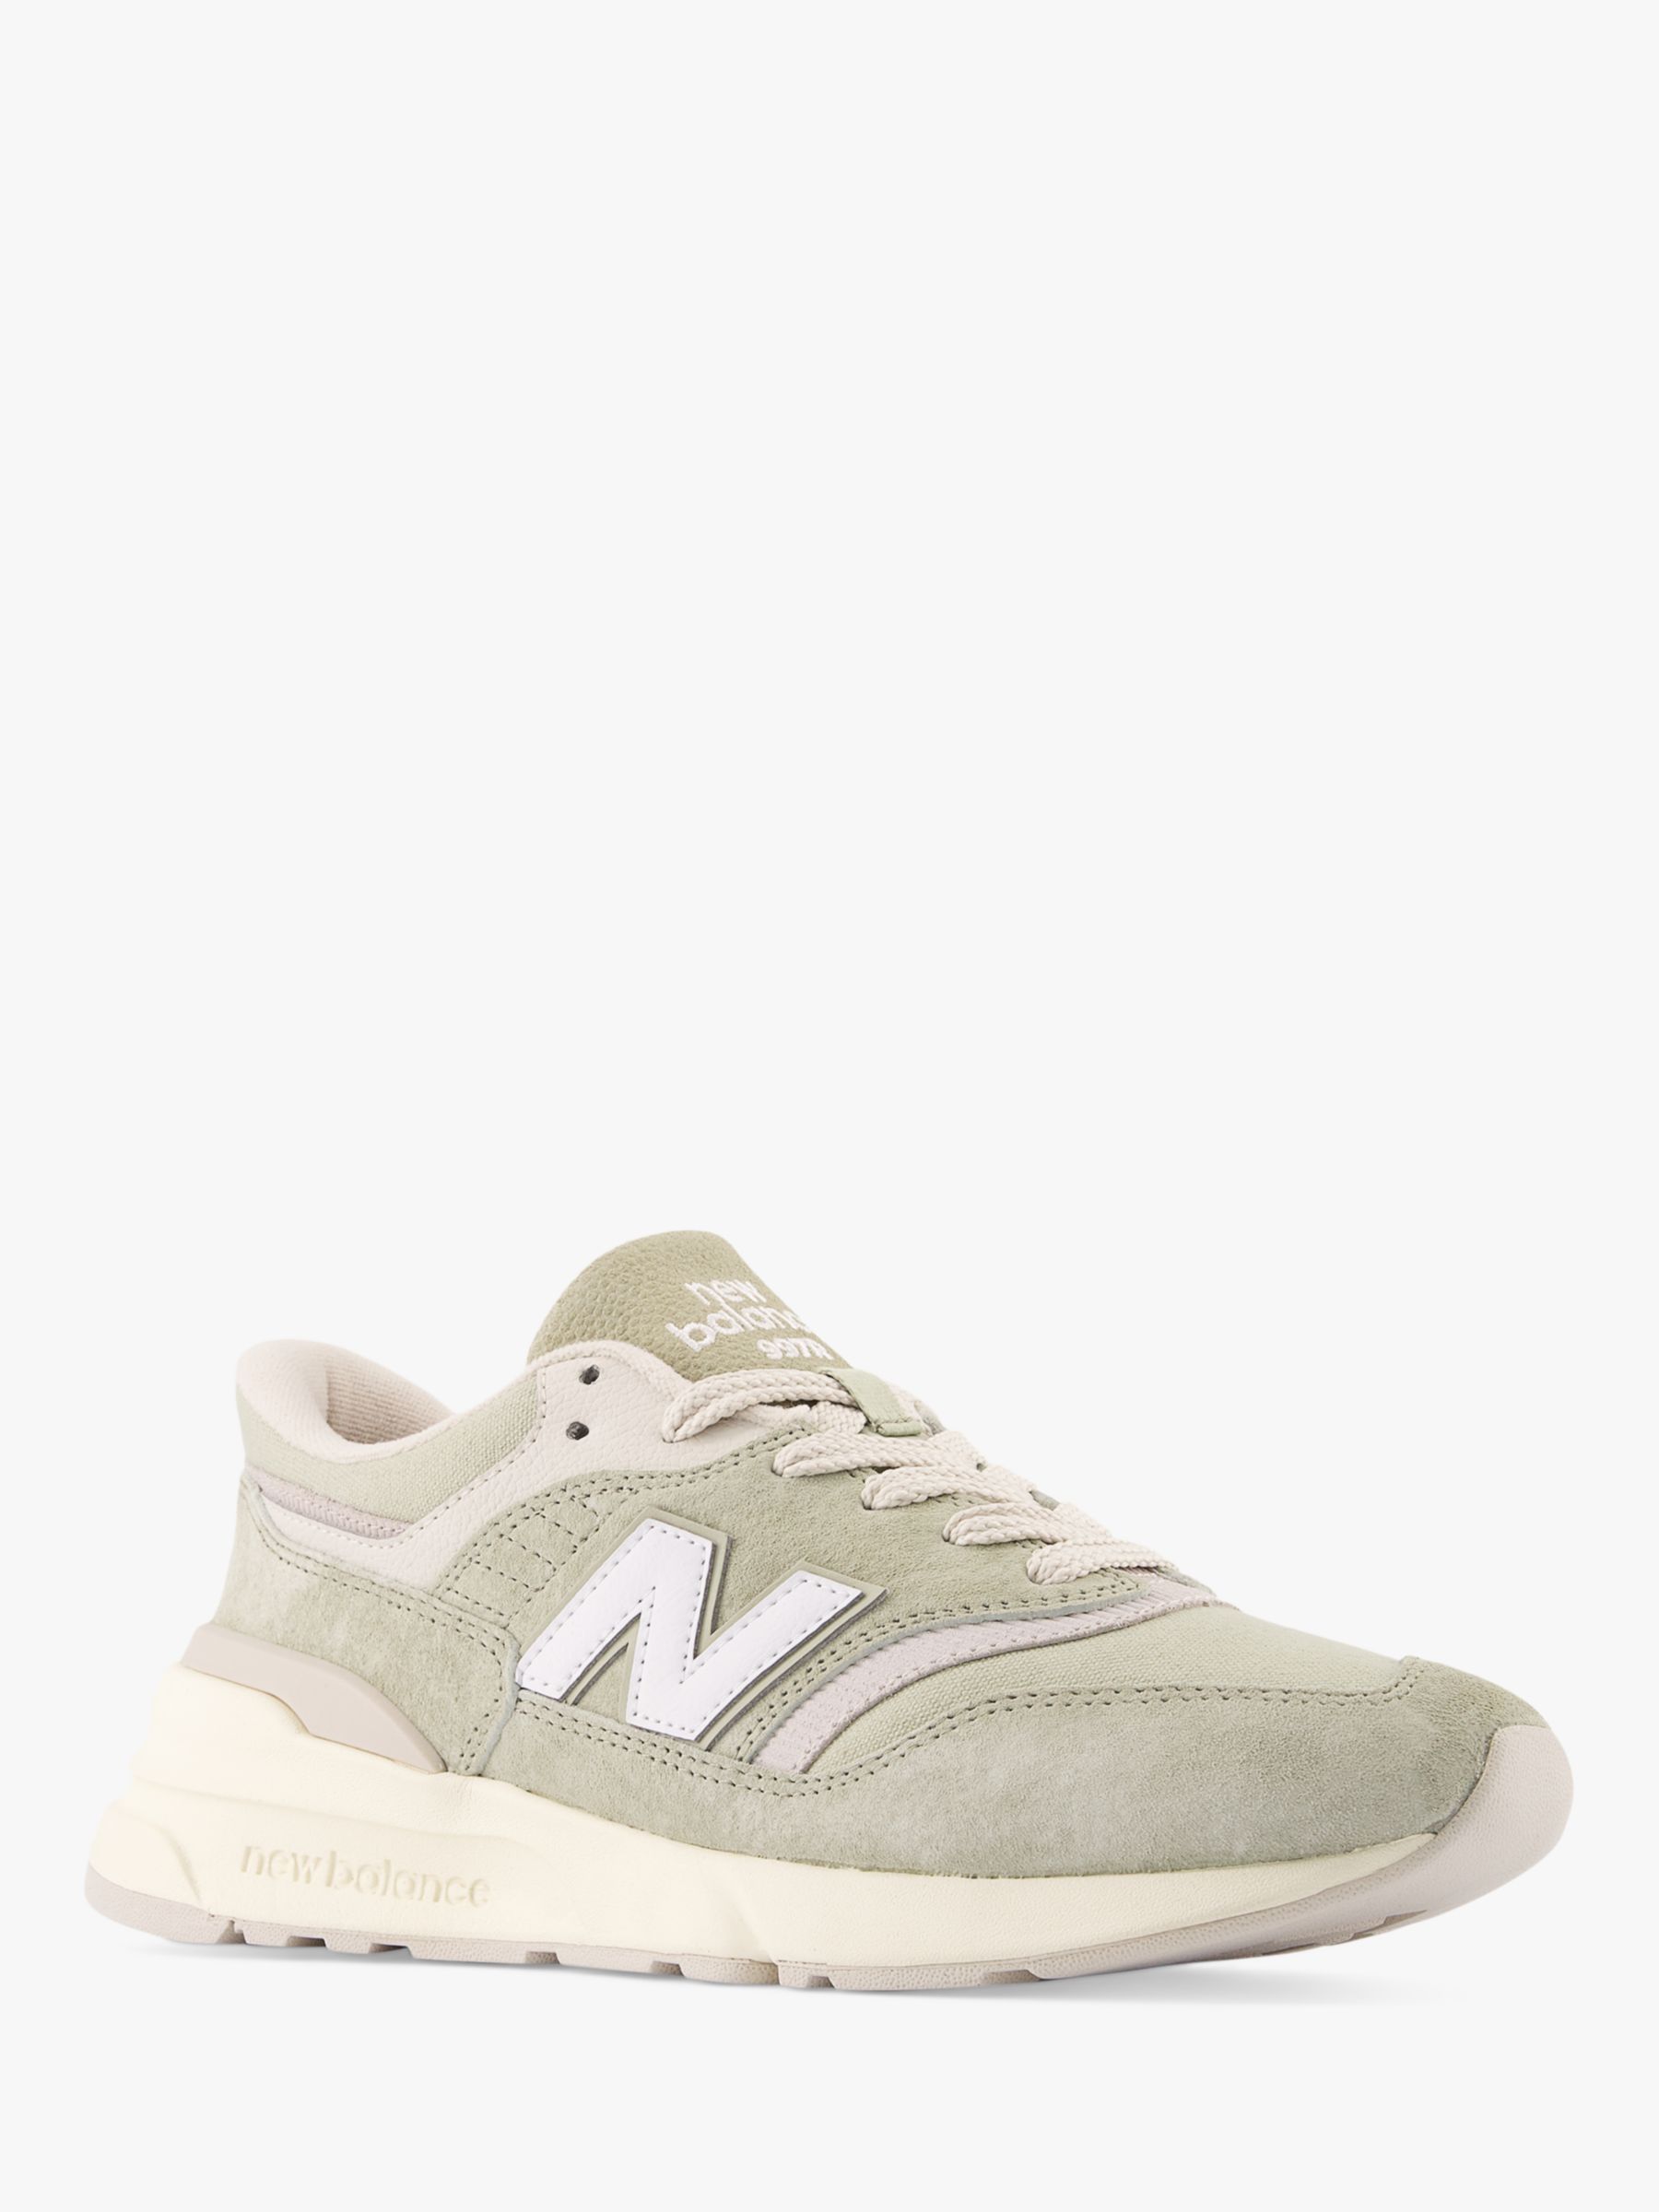 Buy New Balance 997R Suede Trainers Online at johnlewis.com